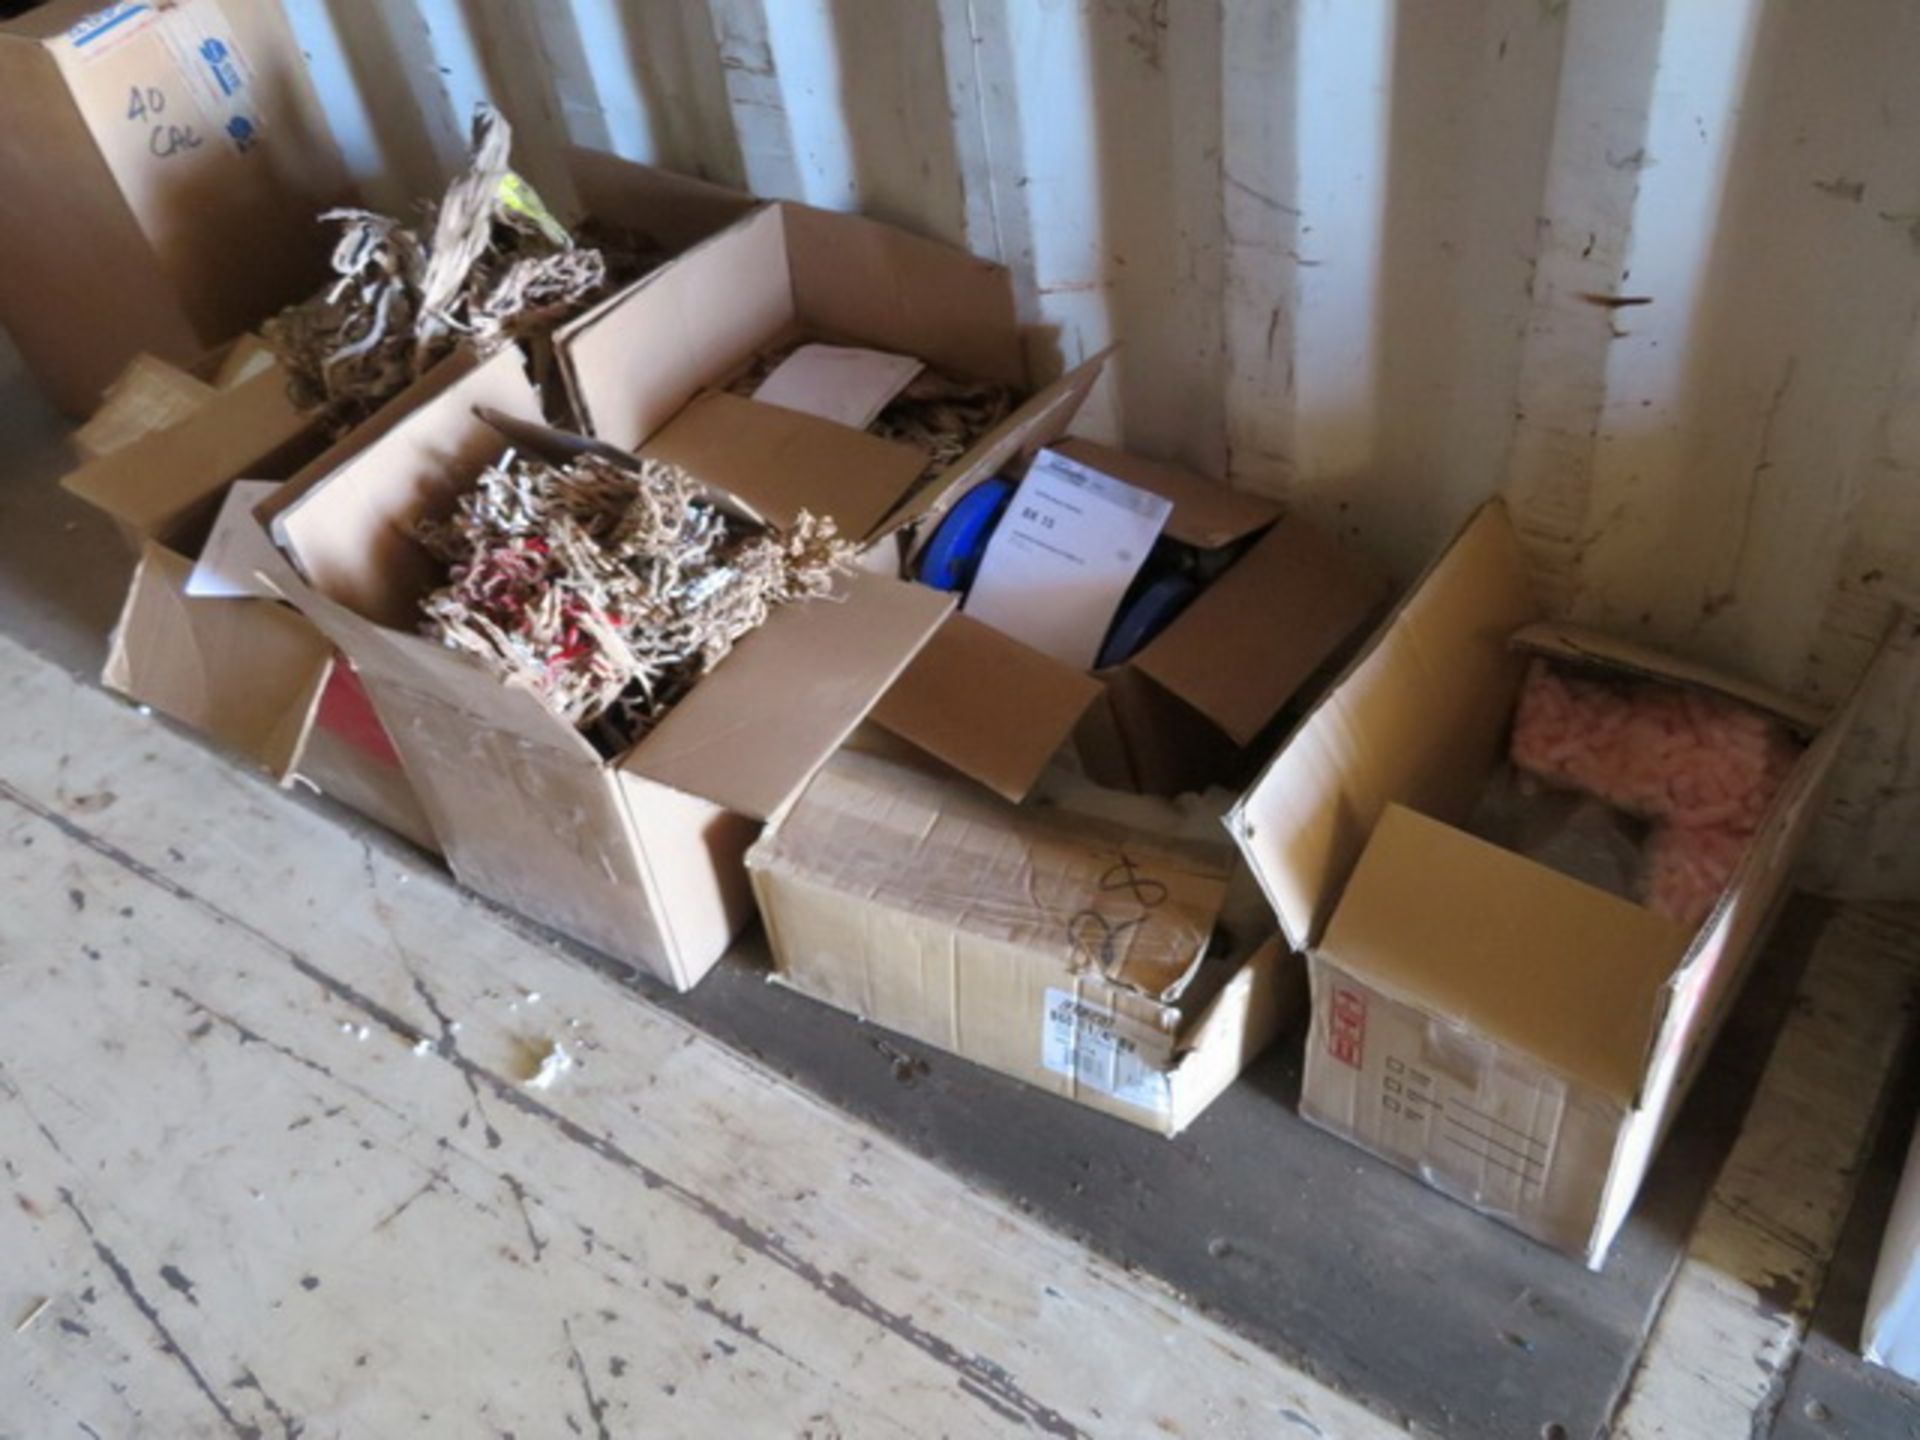 Remaining Contents of Shipping Container. To Include PVC Pipe Fittings, PVC Ball Valves CWC 3/8" - Image 25 of 61